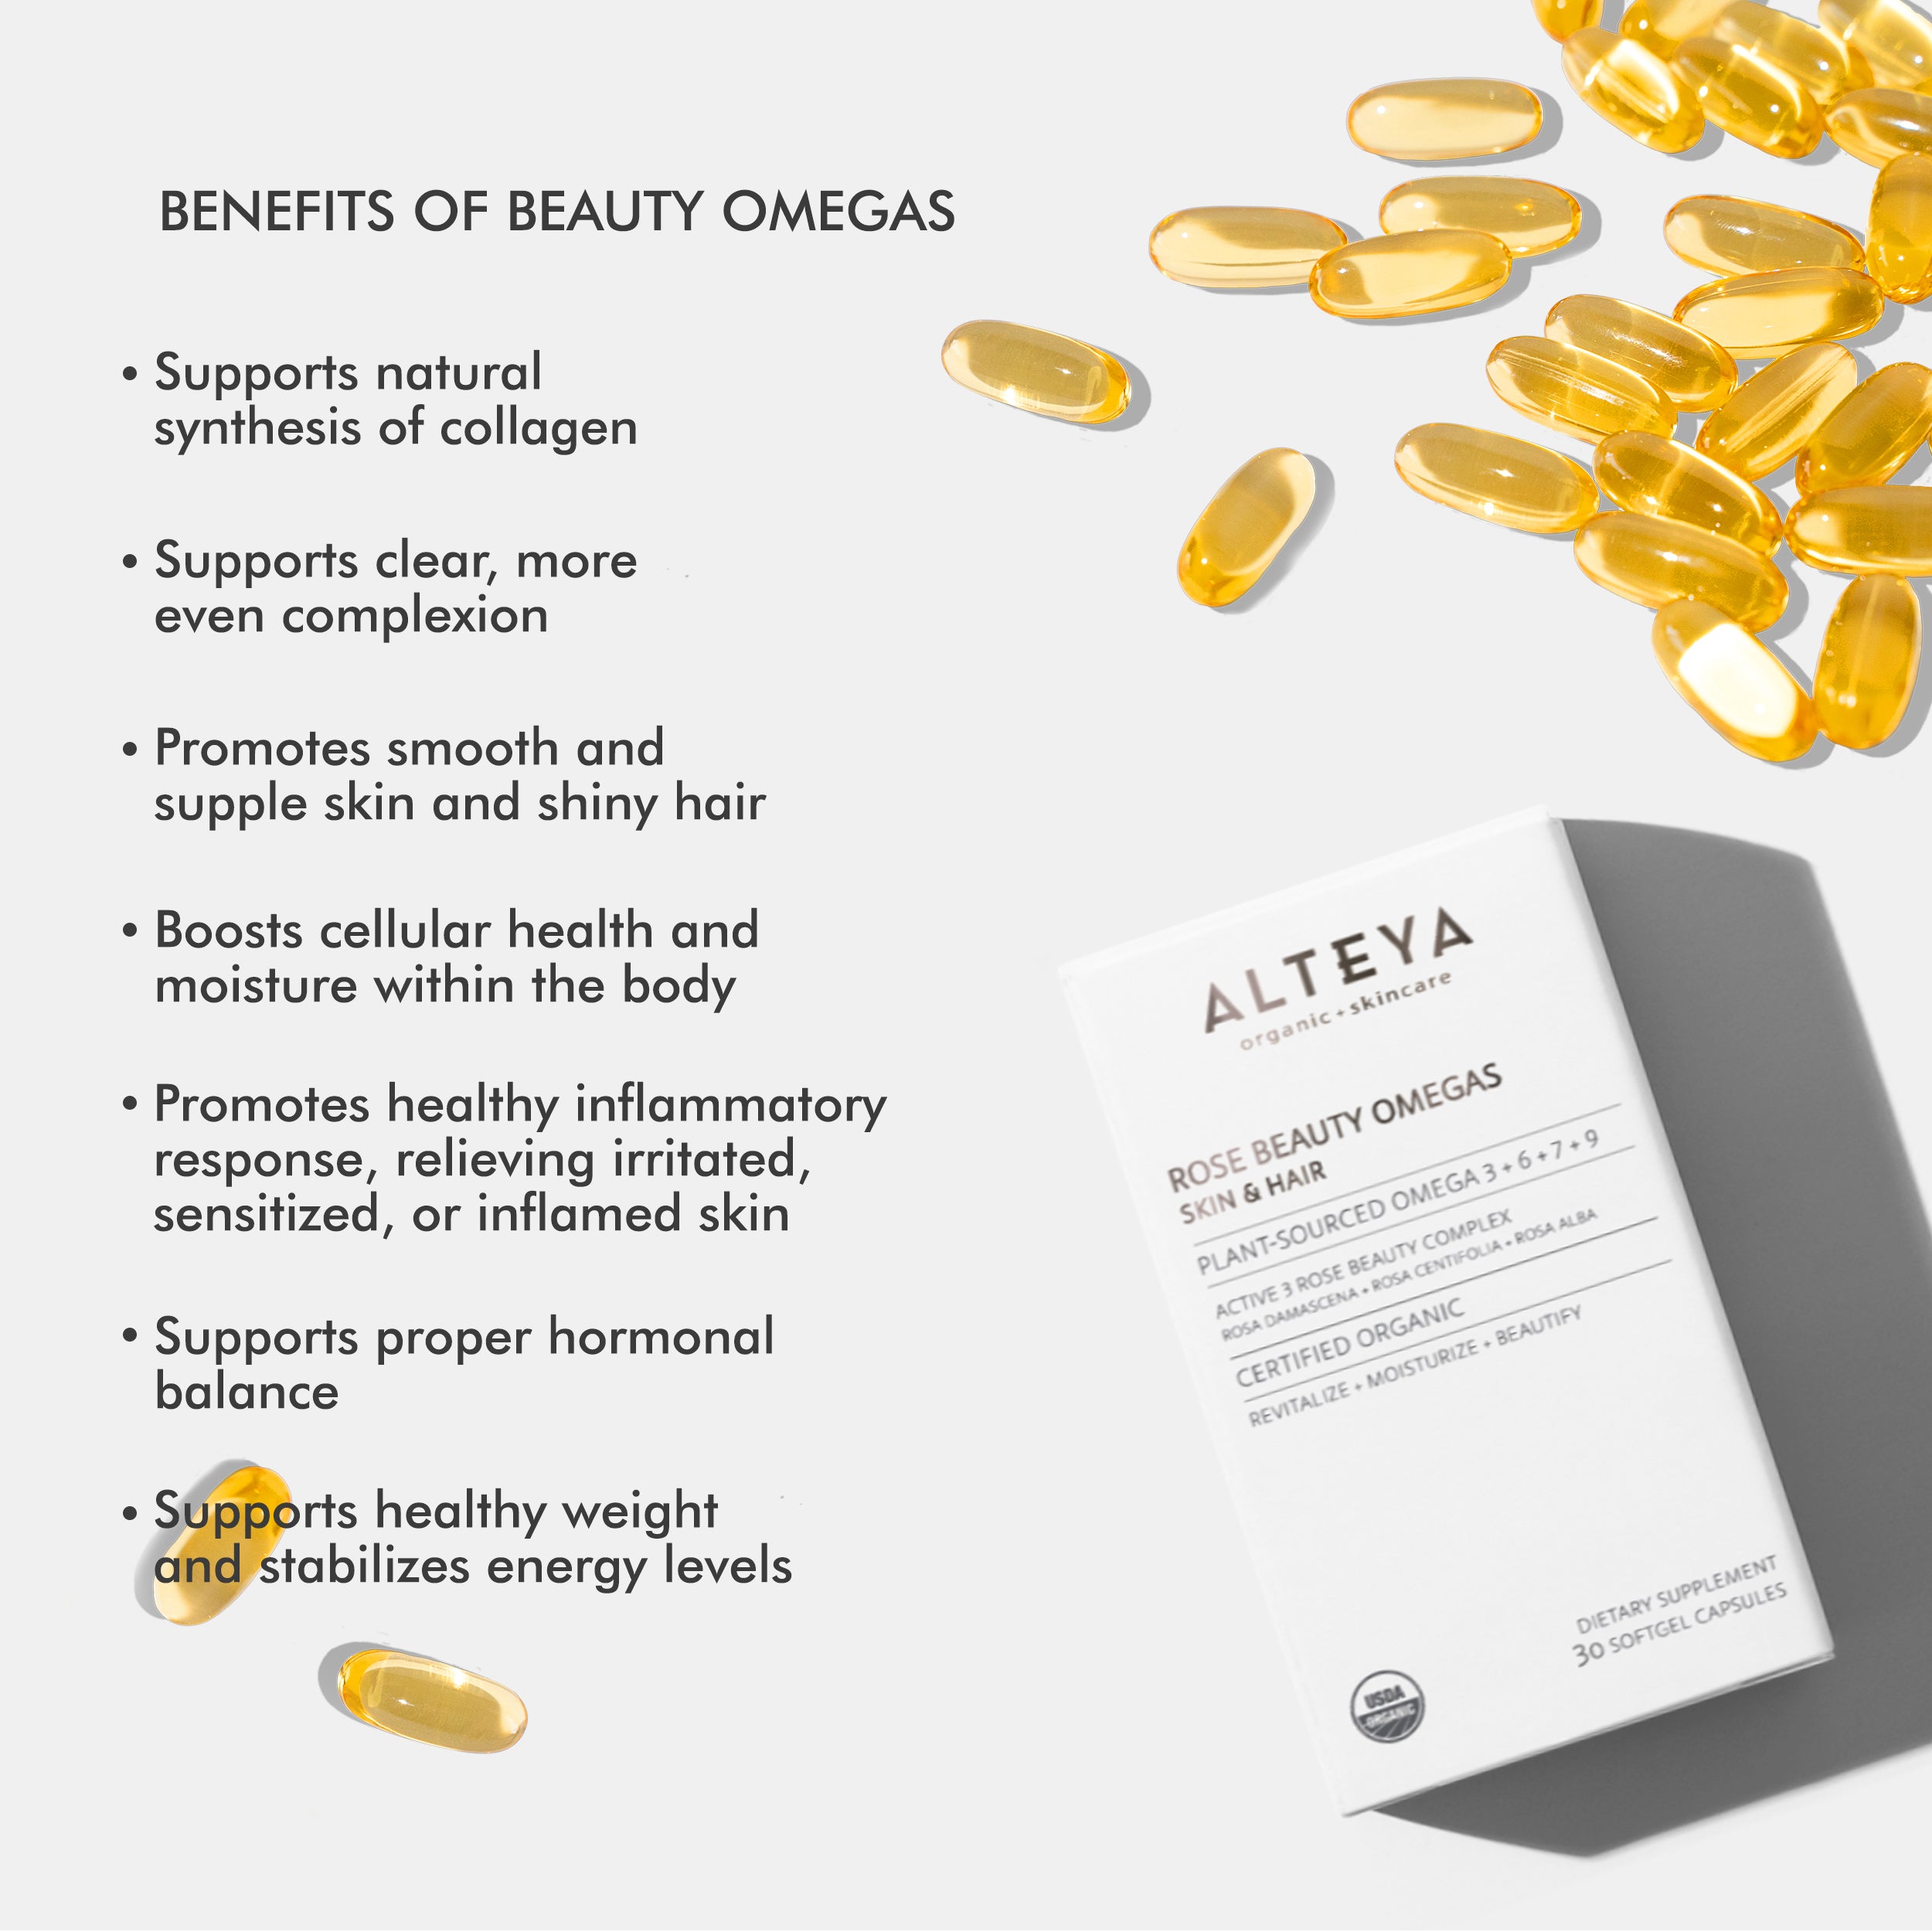 Discover the exceptional benefits of Rose Beauty Omegas Skin & Hair Organic Supplement by Alteya Organics for stronger nails.